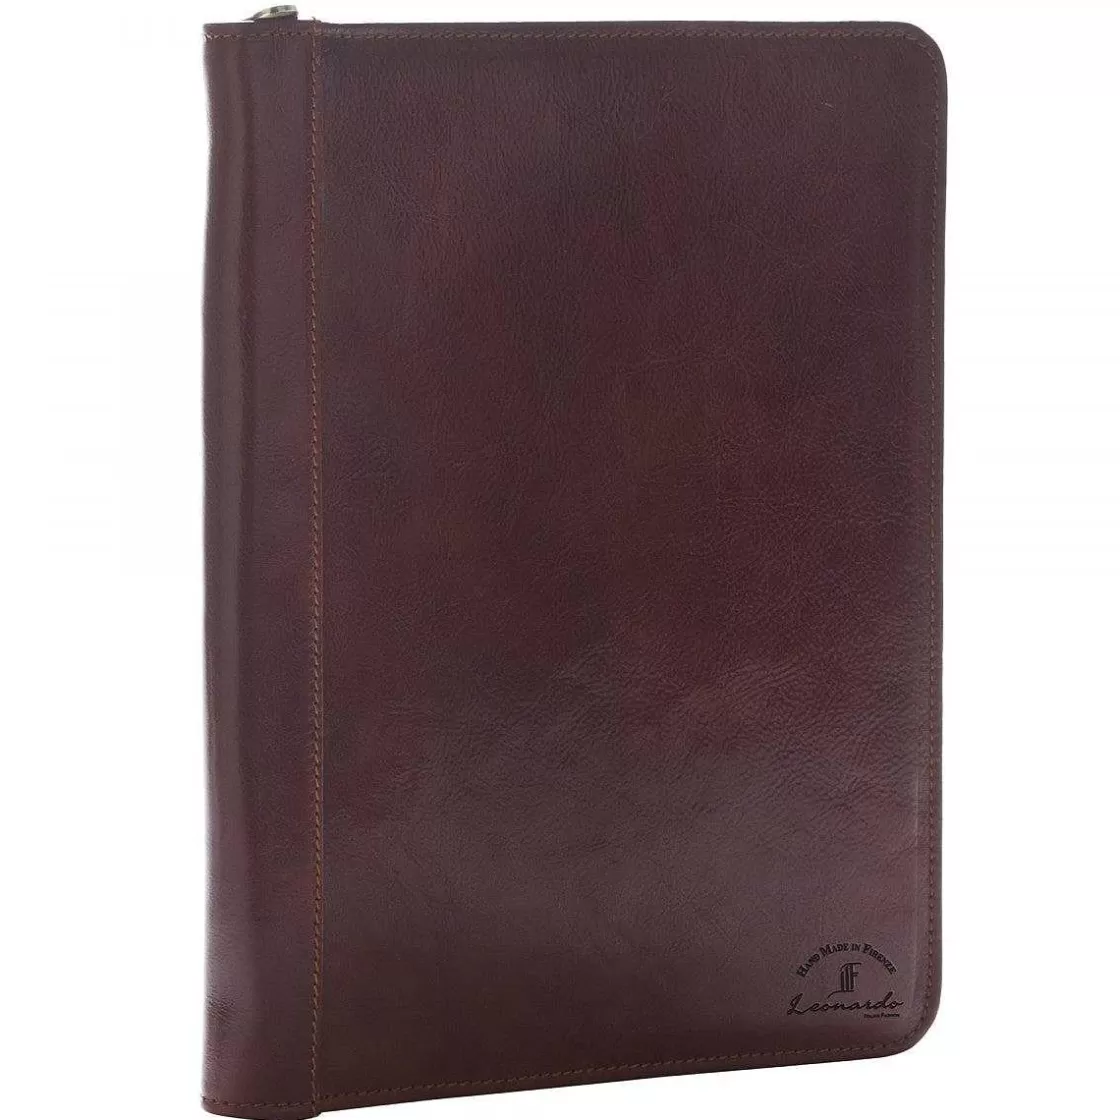 Leonardo Document Holder In Full Grain Leather With Zip Closure And Utility Pockets Best Sale